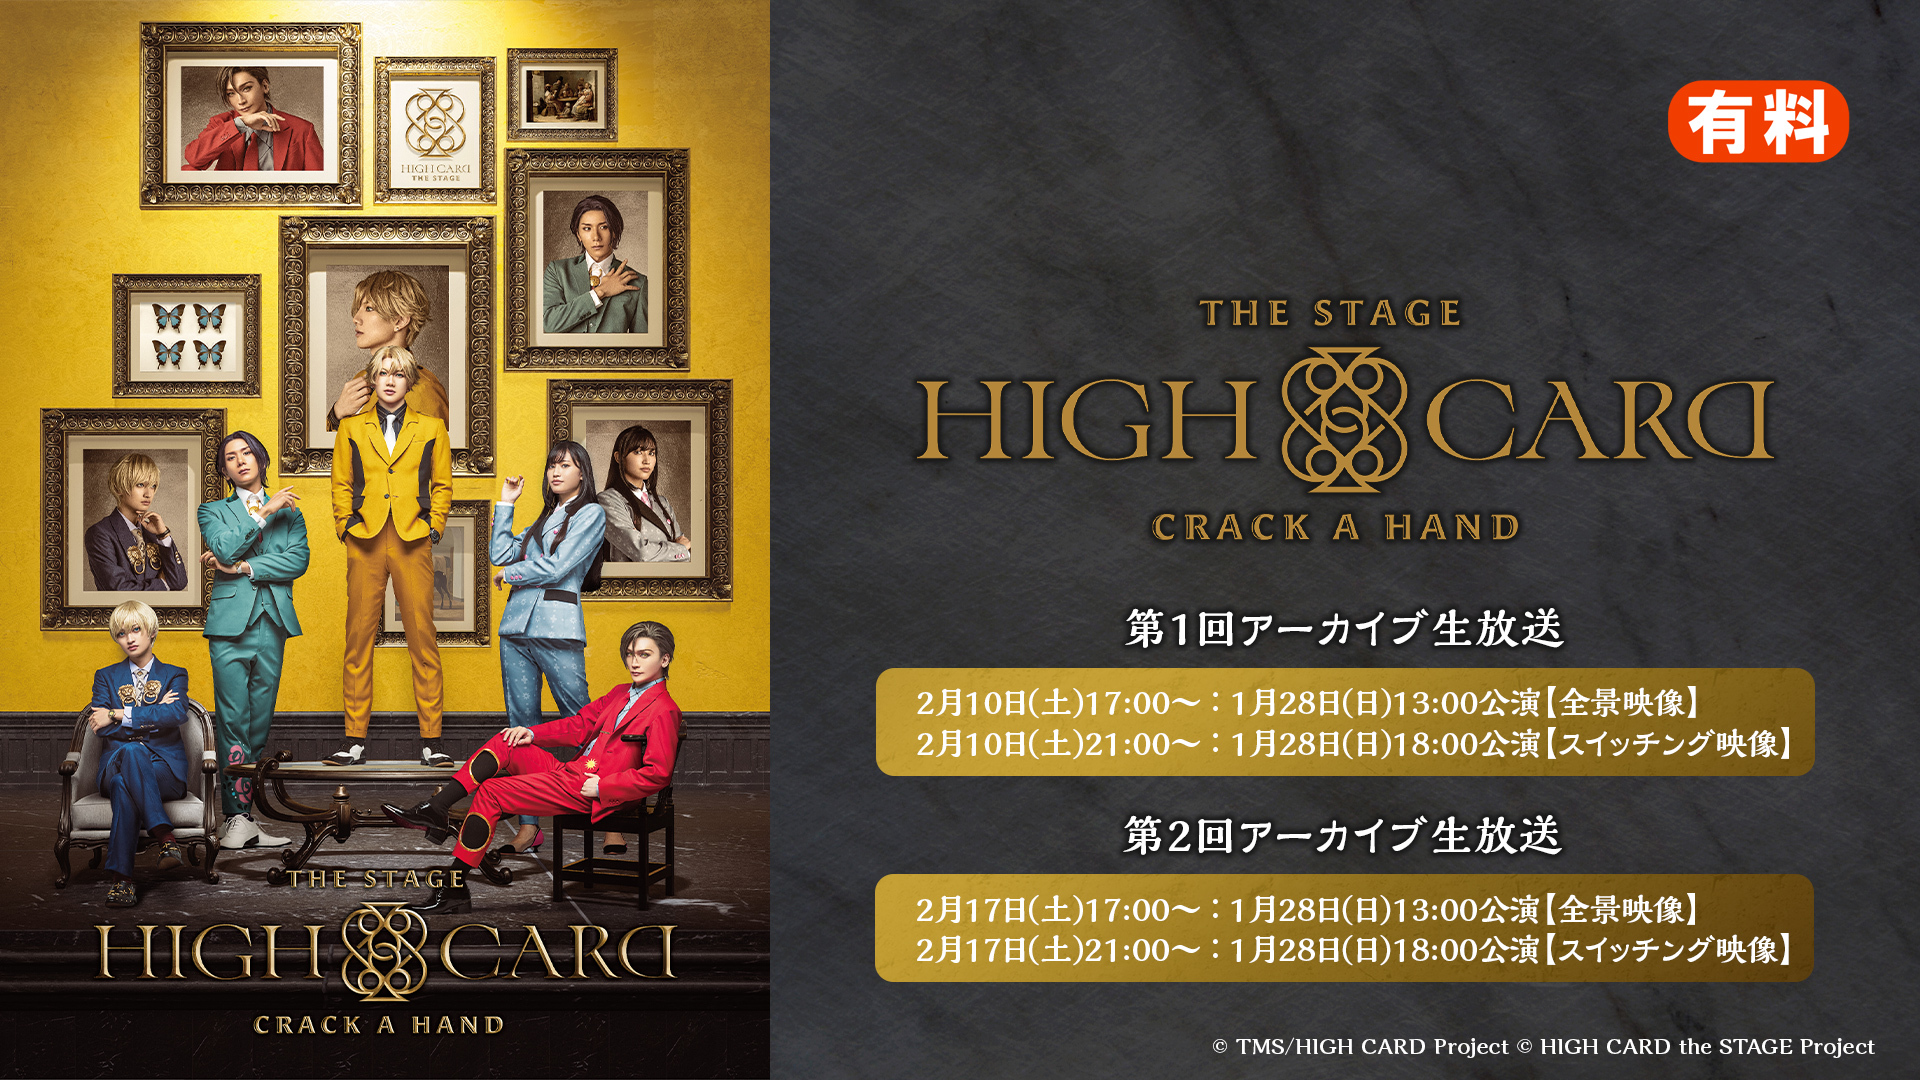 HIGH CARD the STAGE – CRACK A HAND アーカイブ生放送